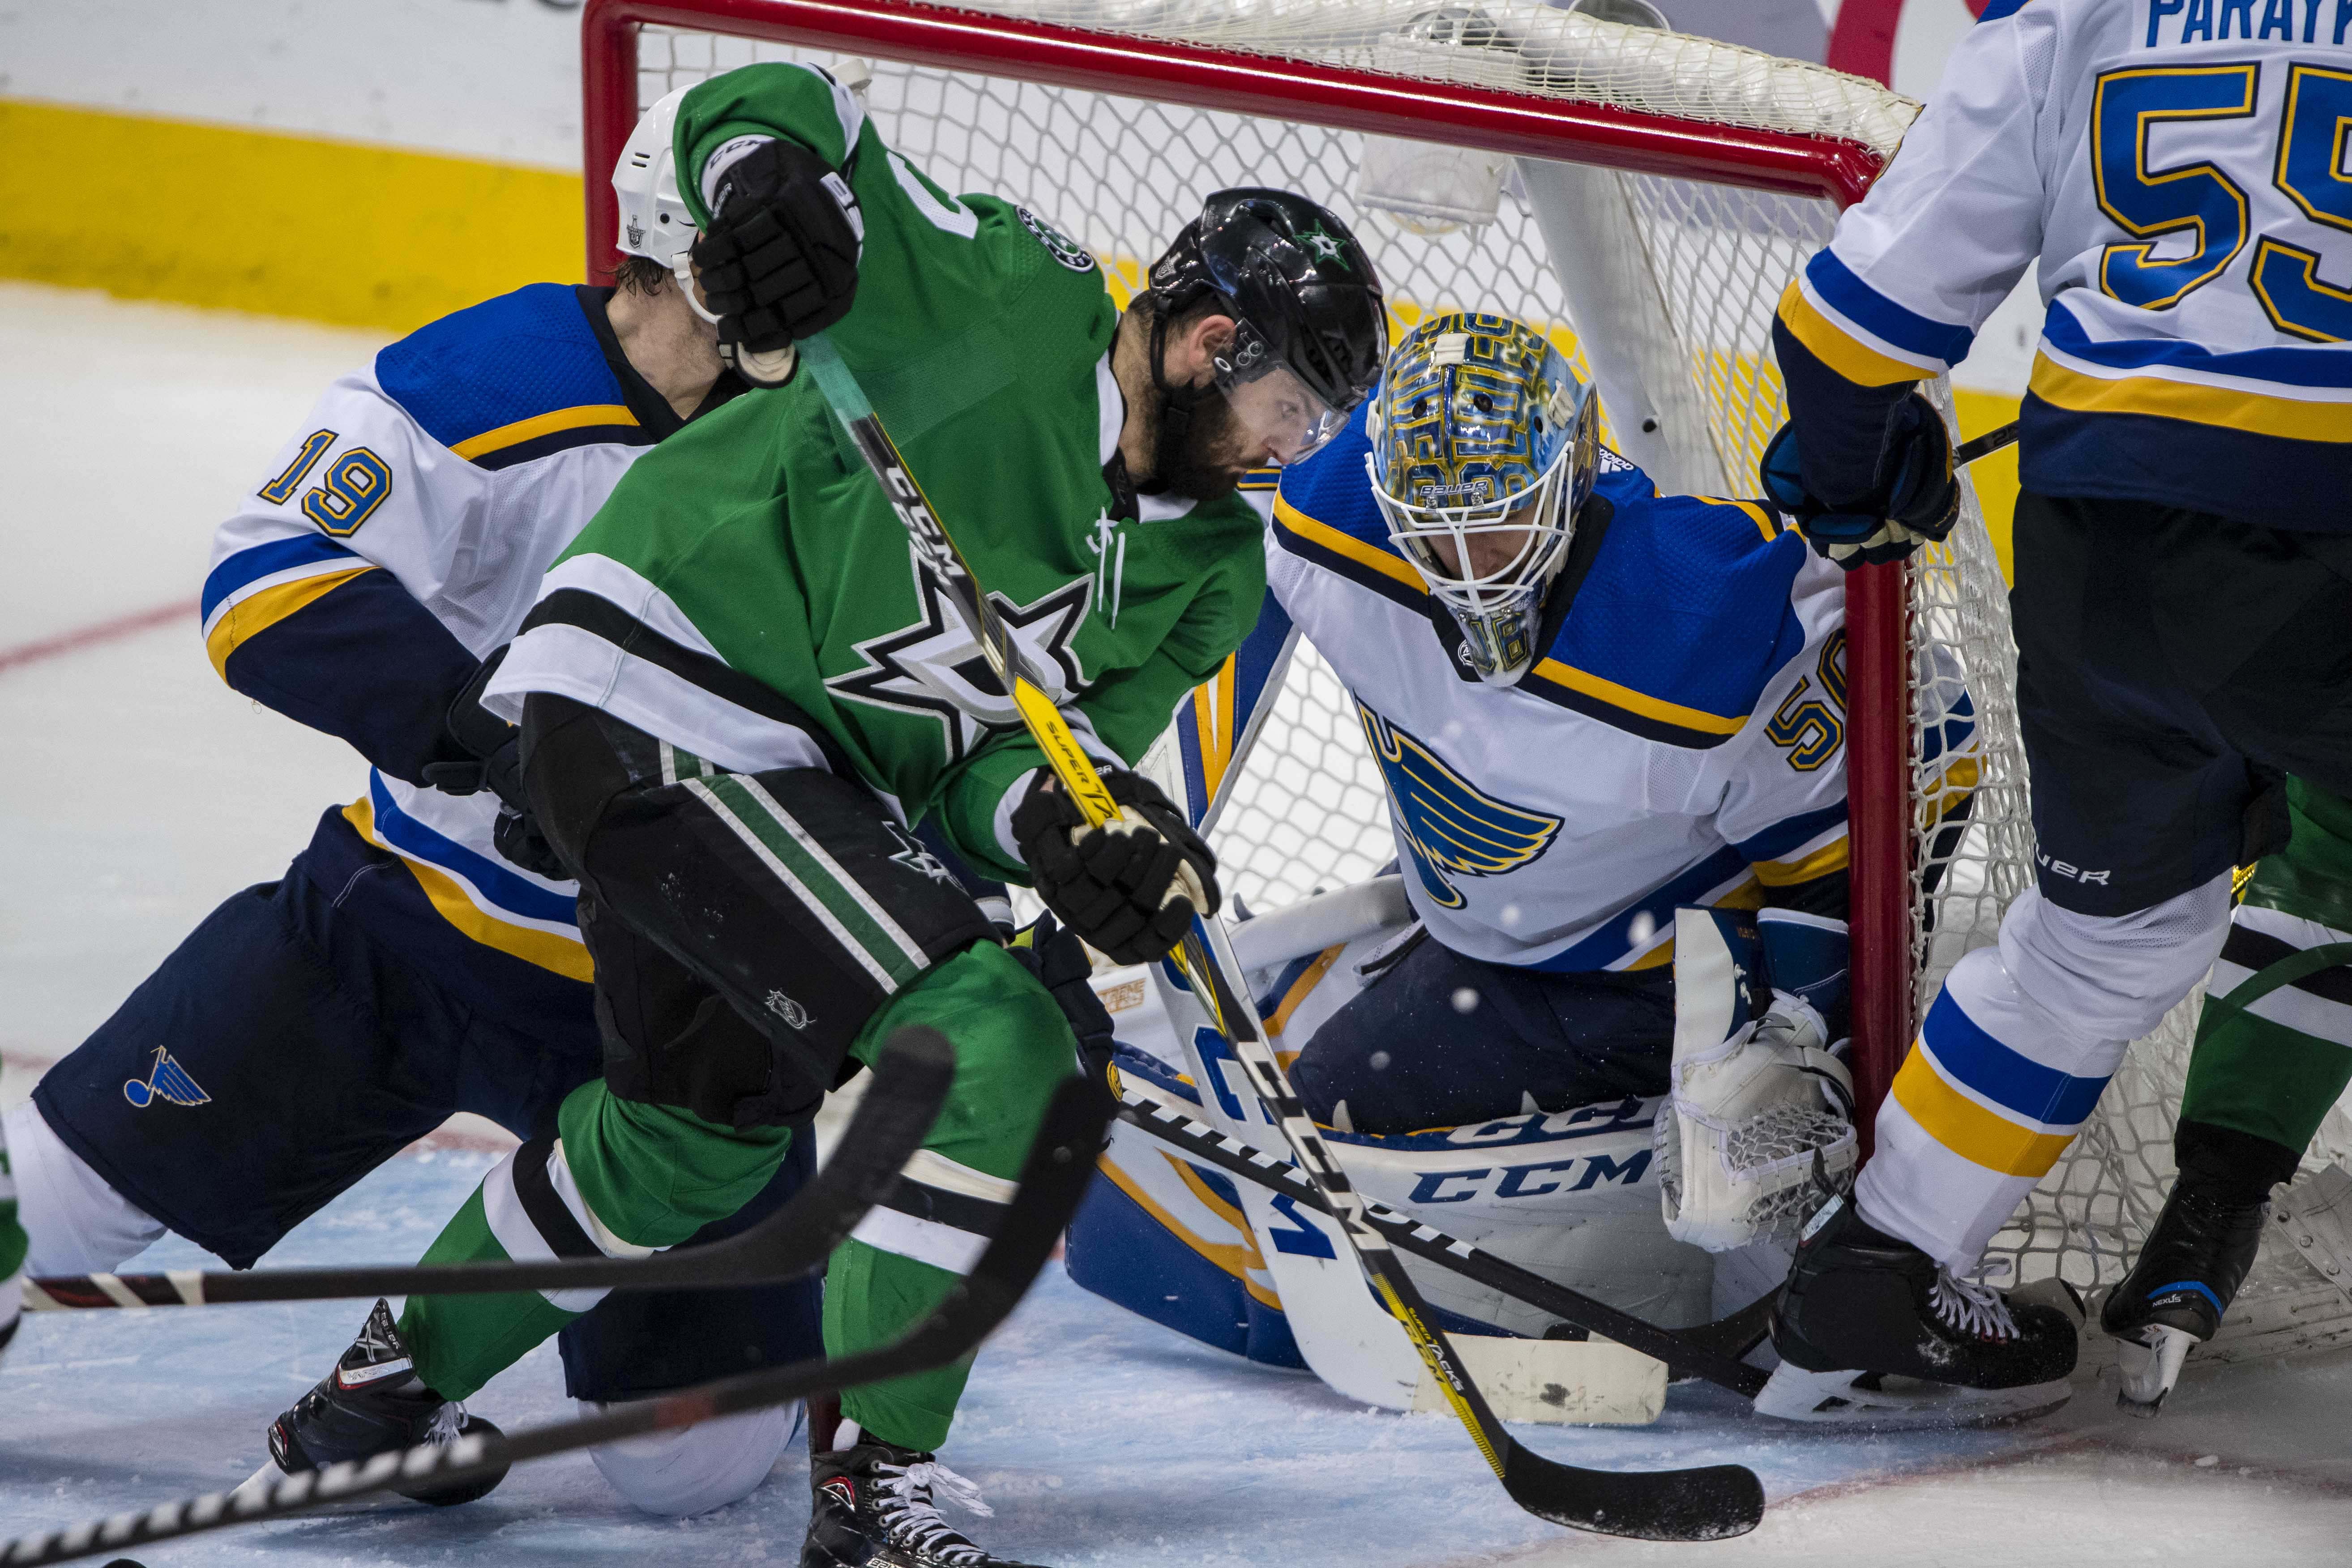 Stars, Blues meet again in Game 7 for spot in West finals